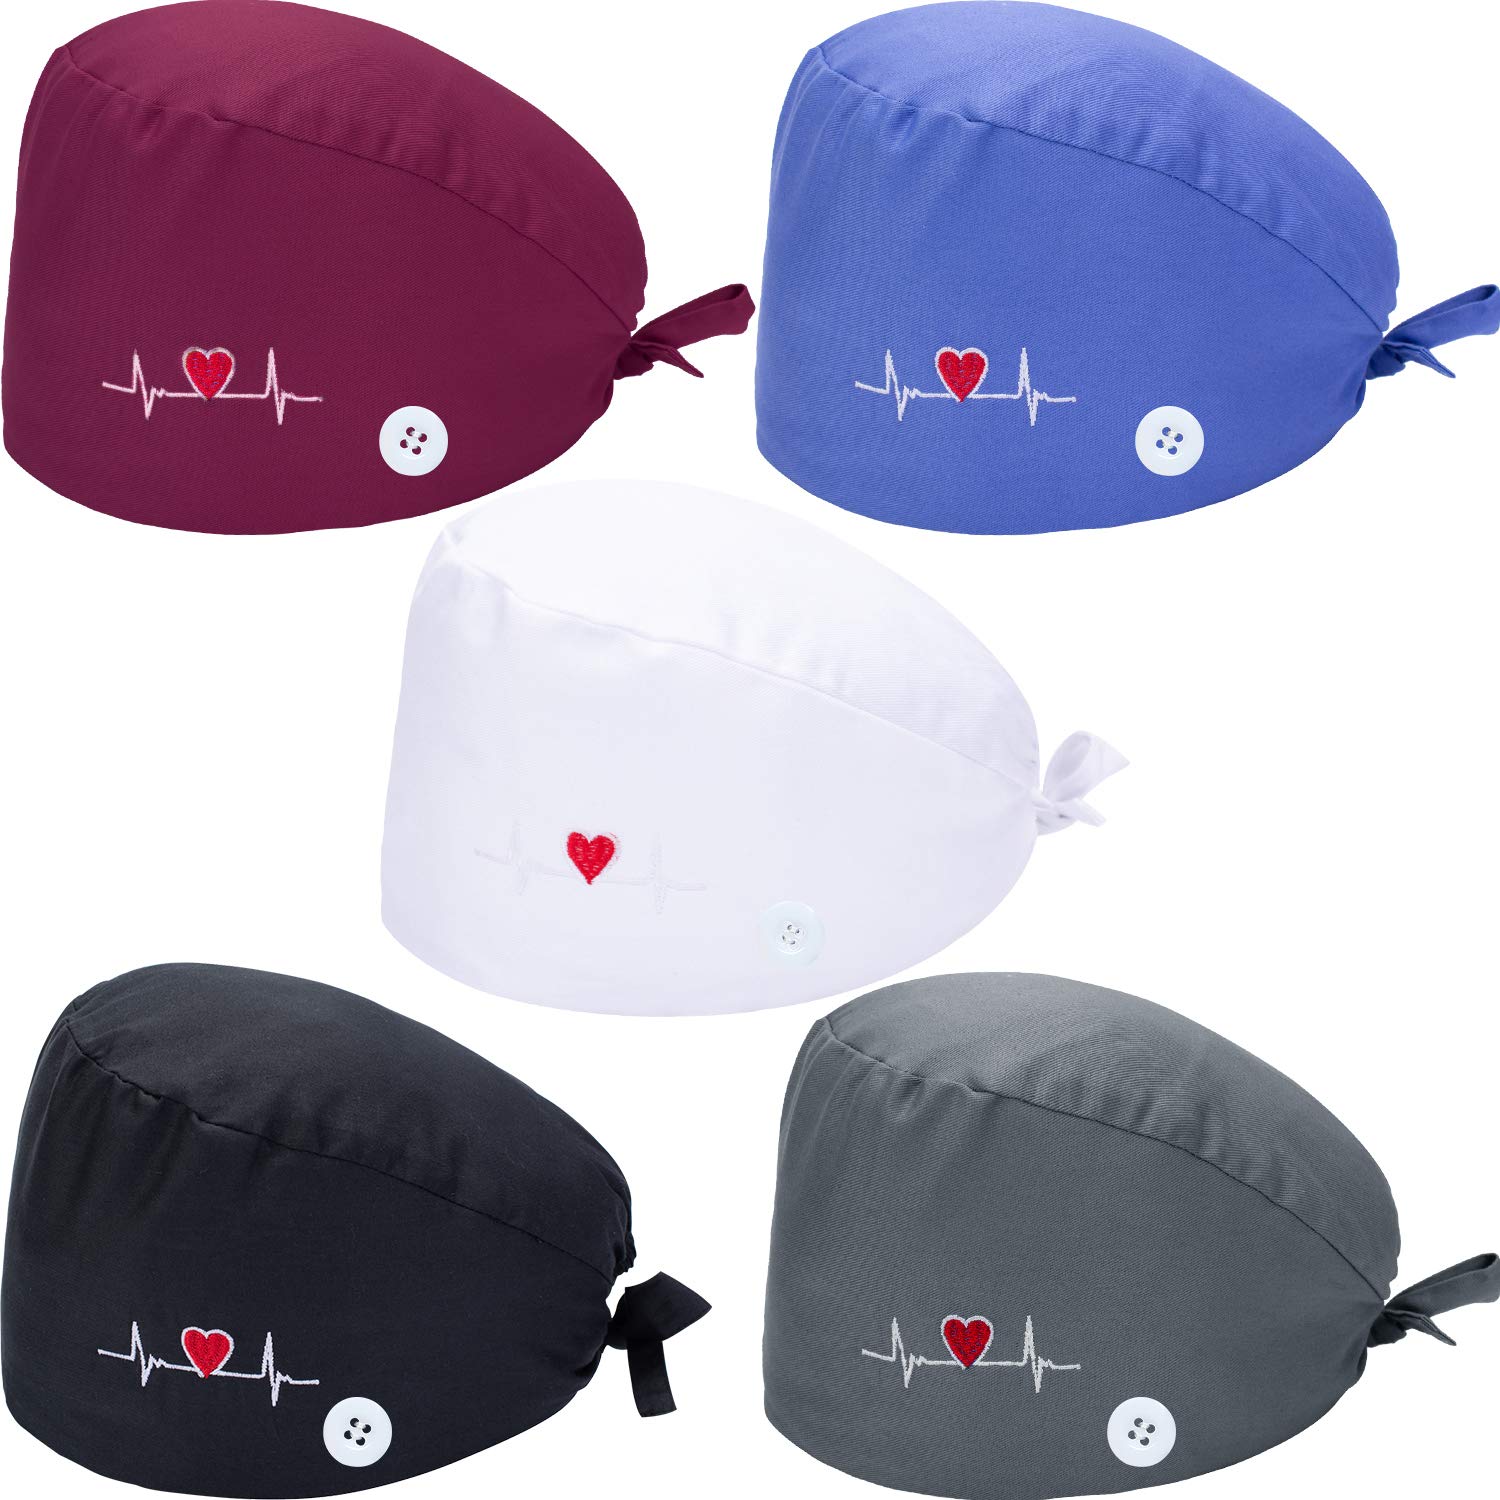 SATINIOR 5 Pieces Bouffant Cap with Buttons Unisex Sweatband Adjustable Tie  Back Hat Blue gray purple